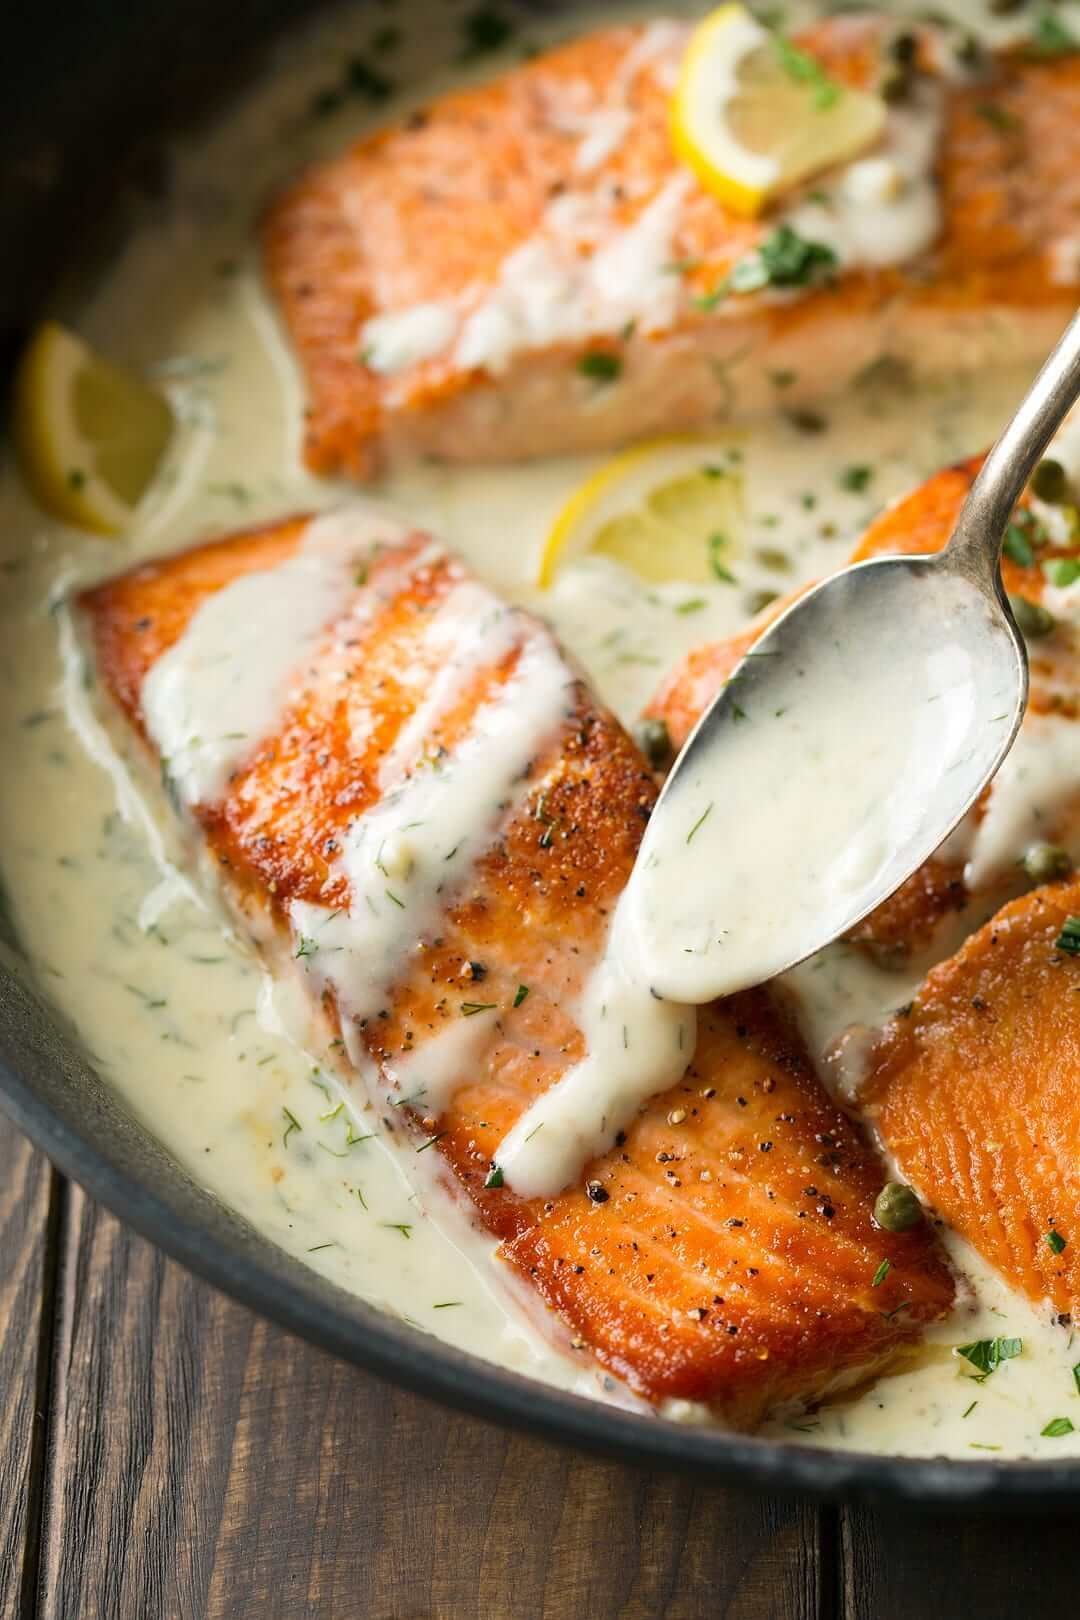 Best Creamy Fish Dishes Of All Time - Easy and Healthy -   15 healthy recipes Salmon sour cream ideas